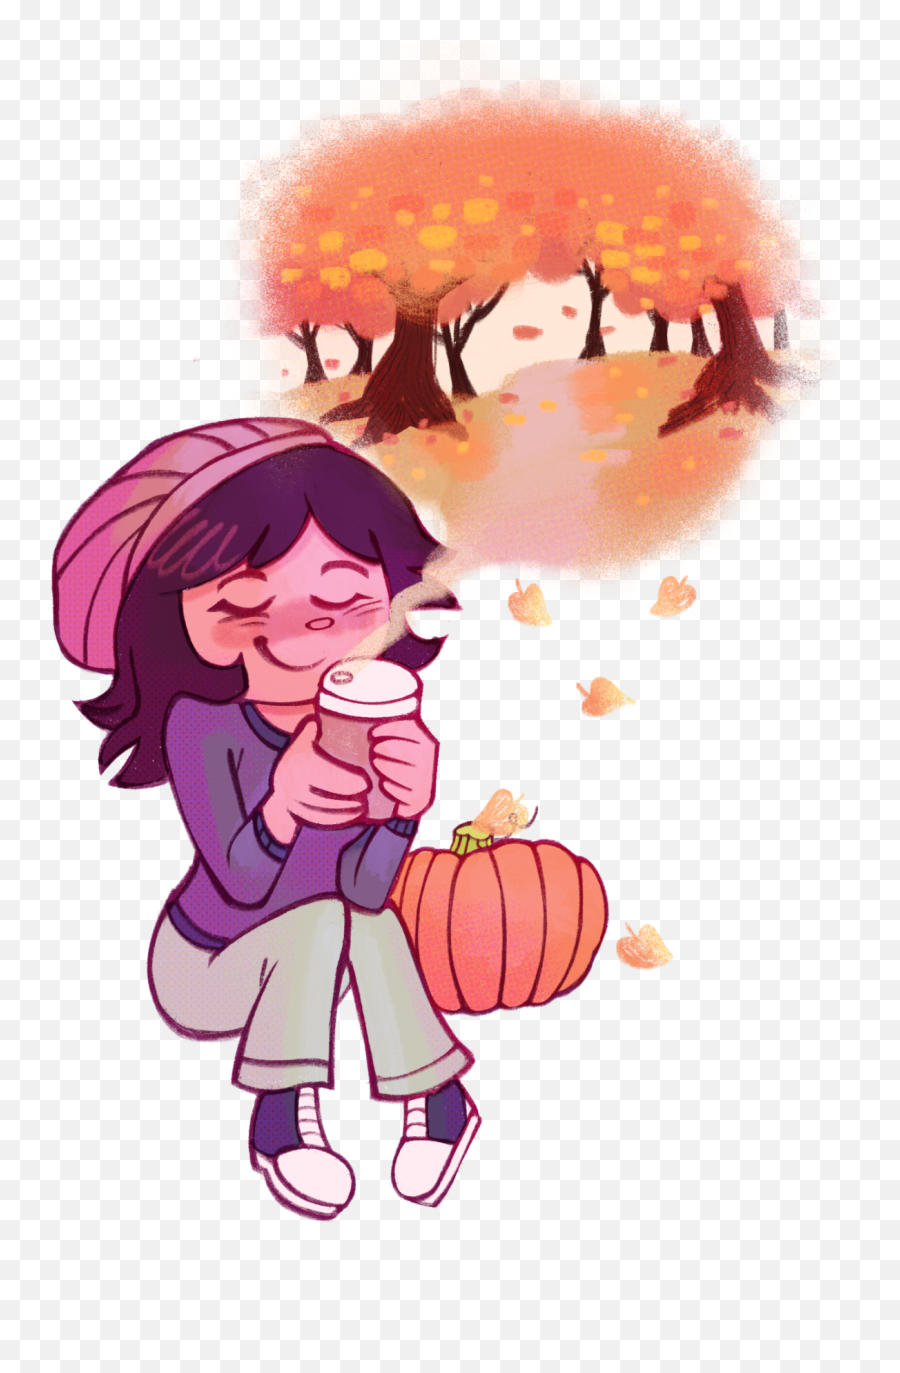 Pumpkin Spice Fall Delight Or Not So Nice Life Emoji,Have A Great Weekend Animated Emoticon